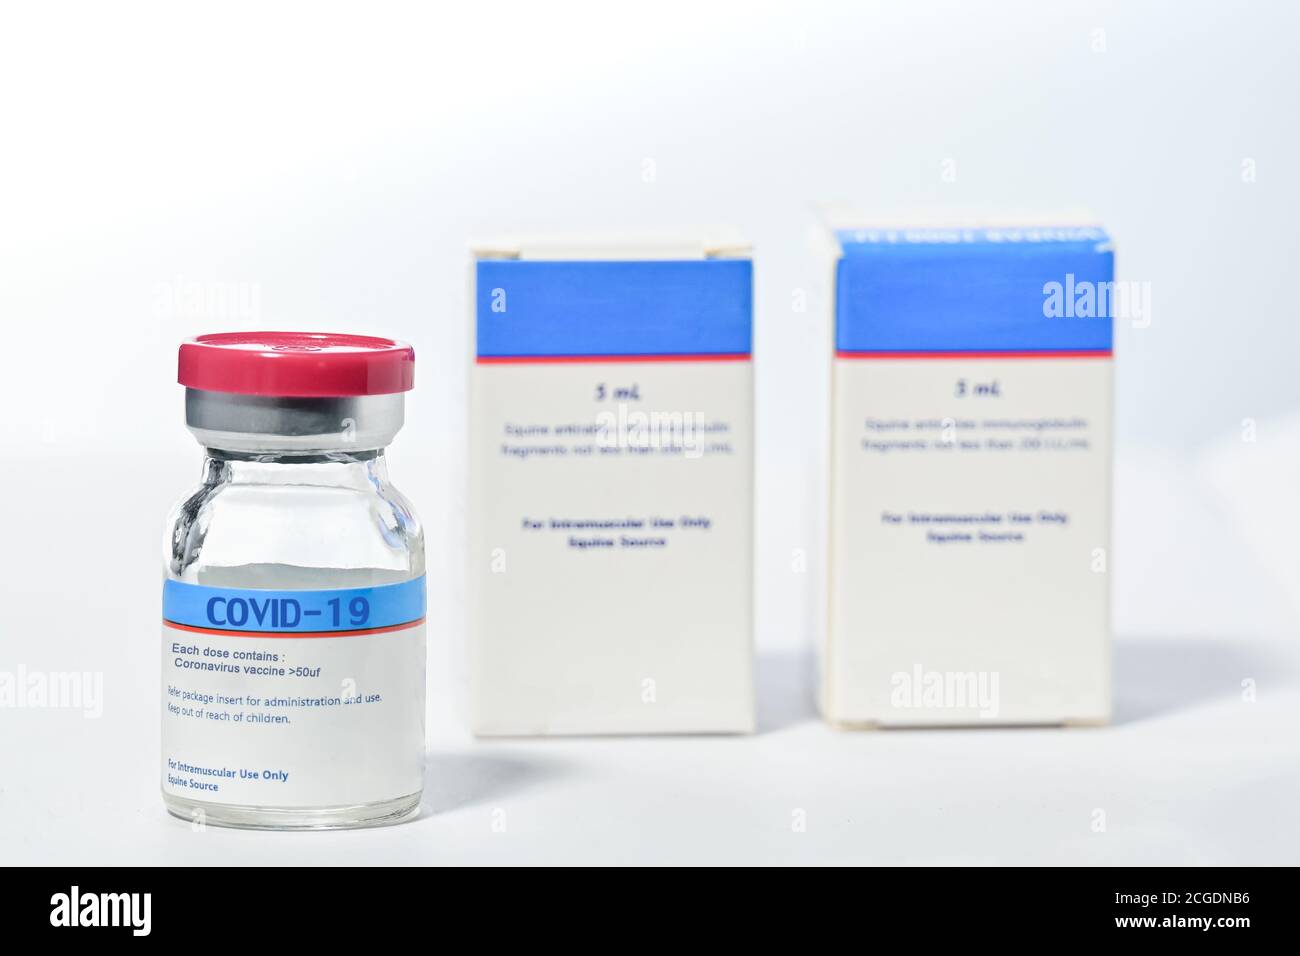 Coronavirus COVID-19 Vaccine,Vaccine and syringe injection for prevention, immunization and treatment Stop Pandemic from COVID-19 infectious, Medicine Stock Photo